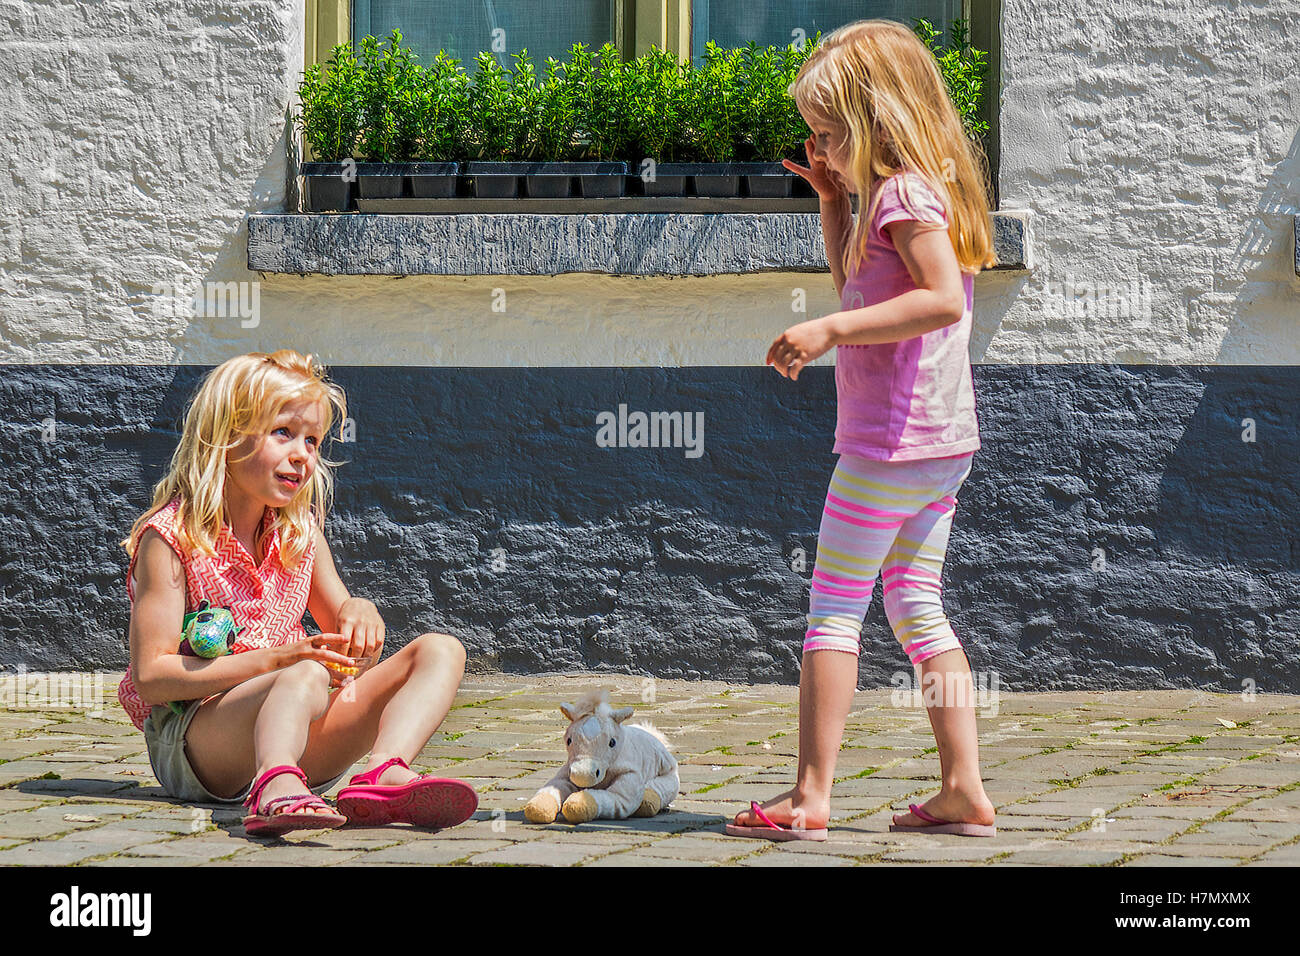 Young Girls At Play Bruges Belgium Stock Photo